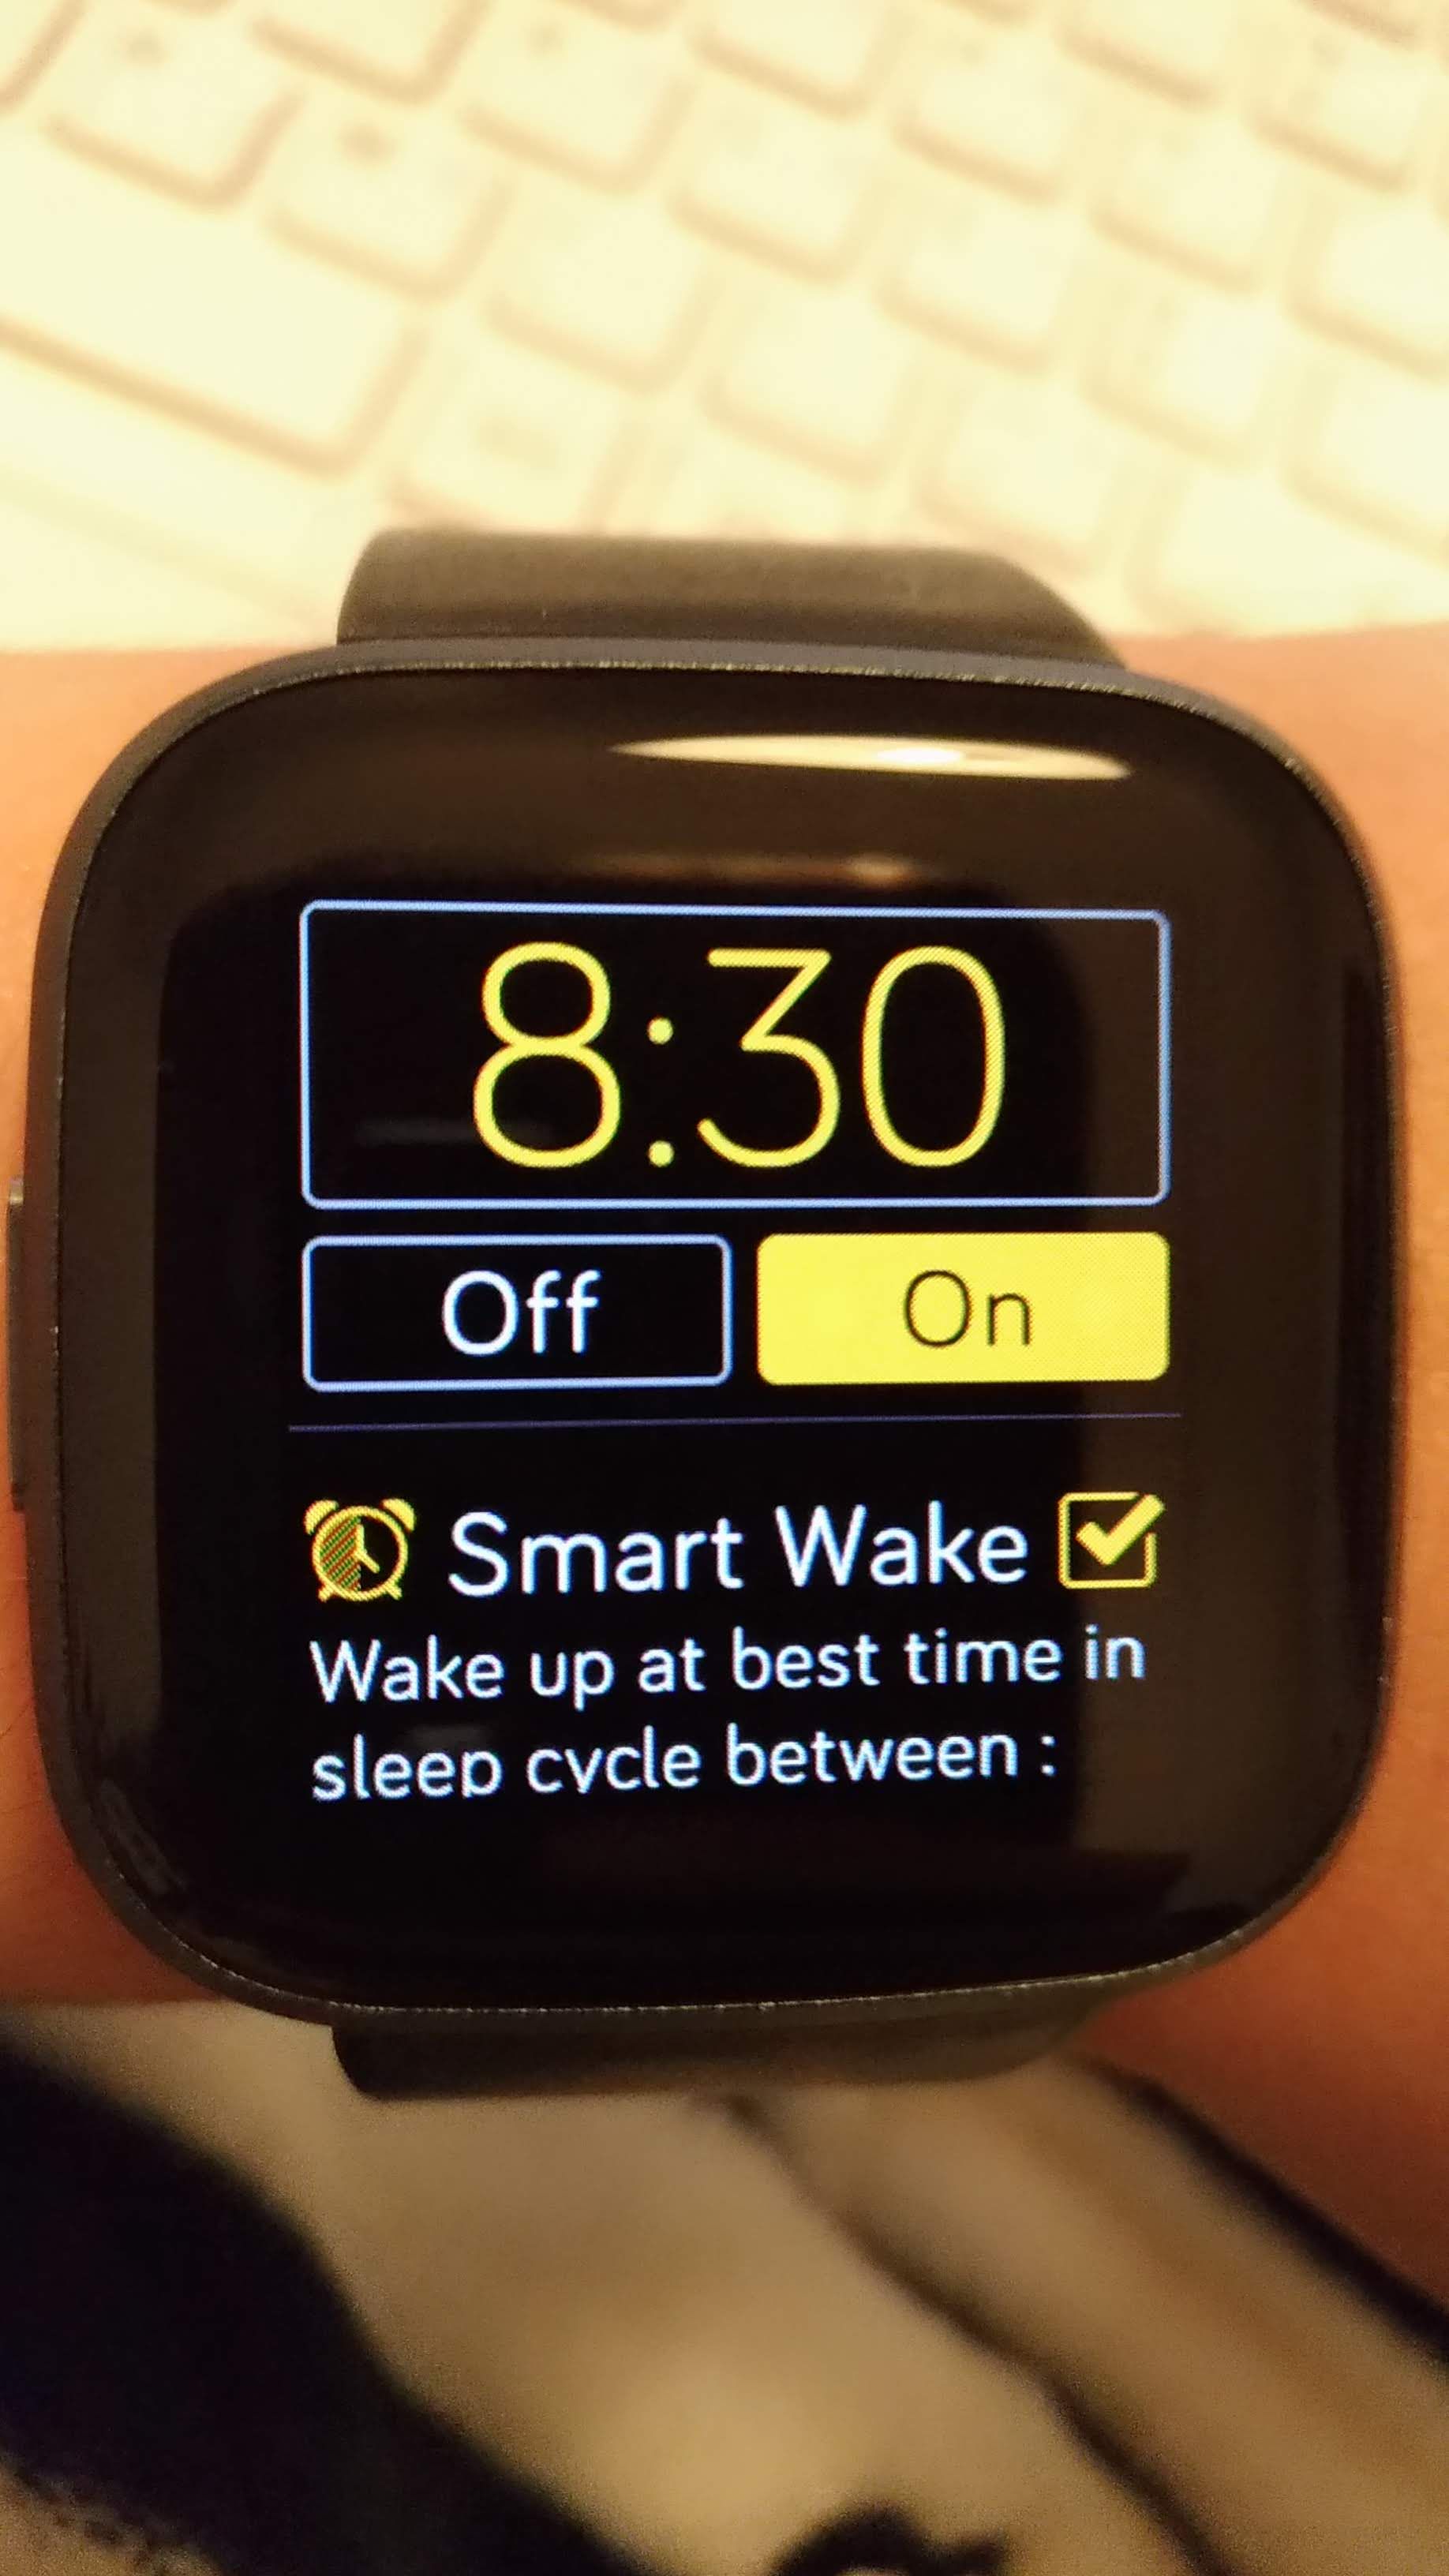 Solved: Does Versa 2 have smart wake or 